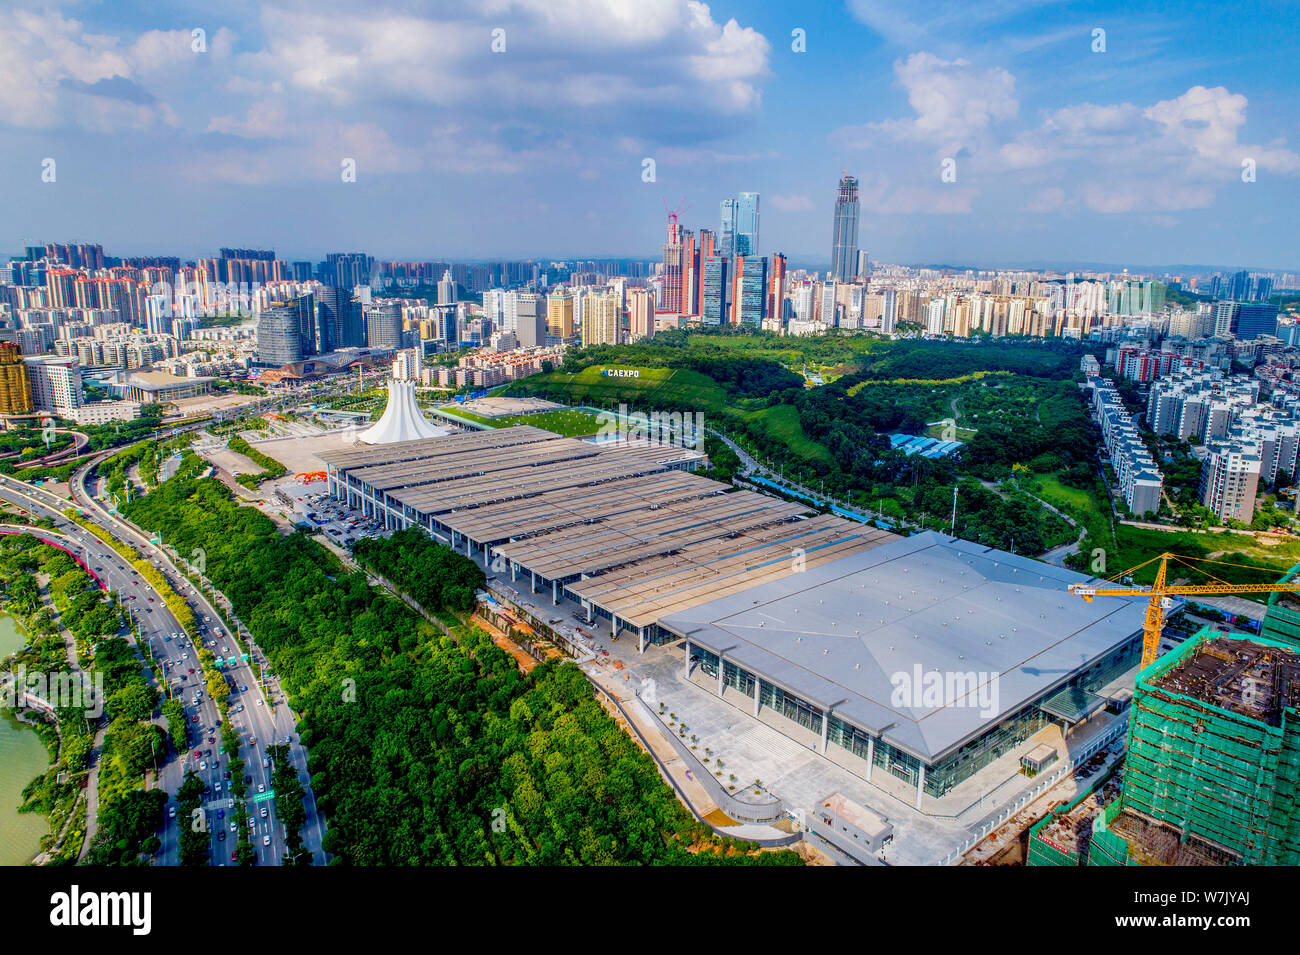 Aerial view of an exhibition hall under construction in Nanning city, south China's Guangxi Zhuang Autonomous Region, 20 August 2017.   The 14th China Stock Photo